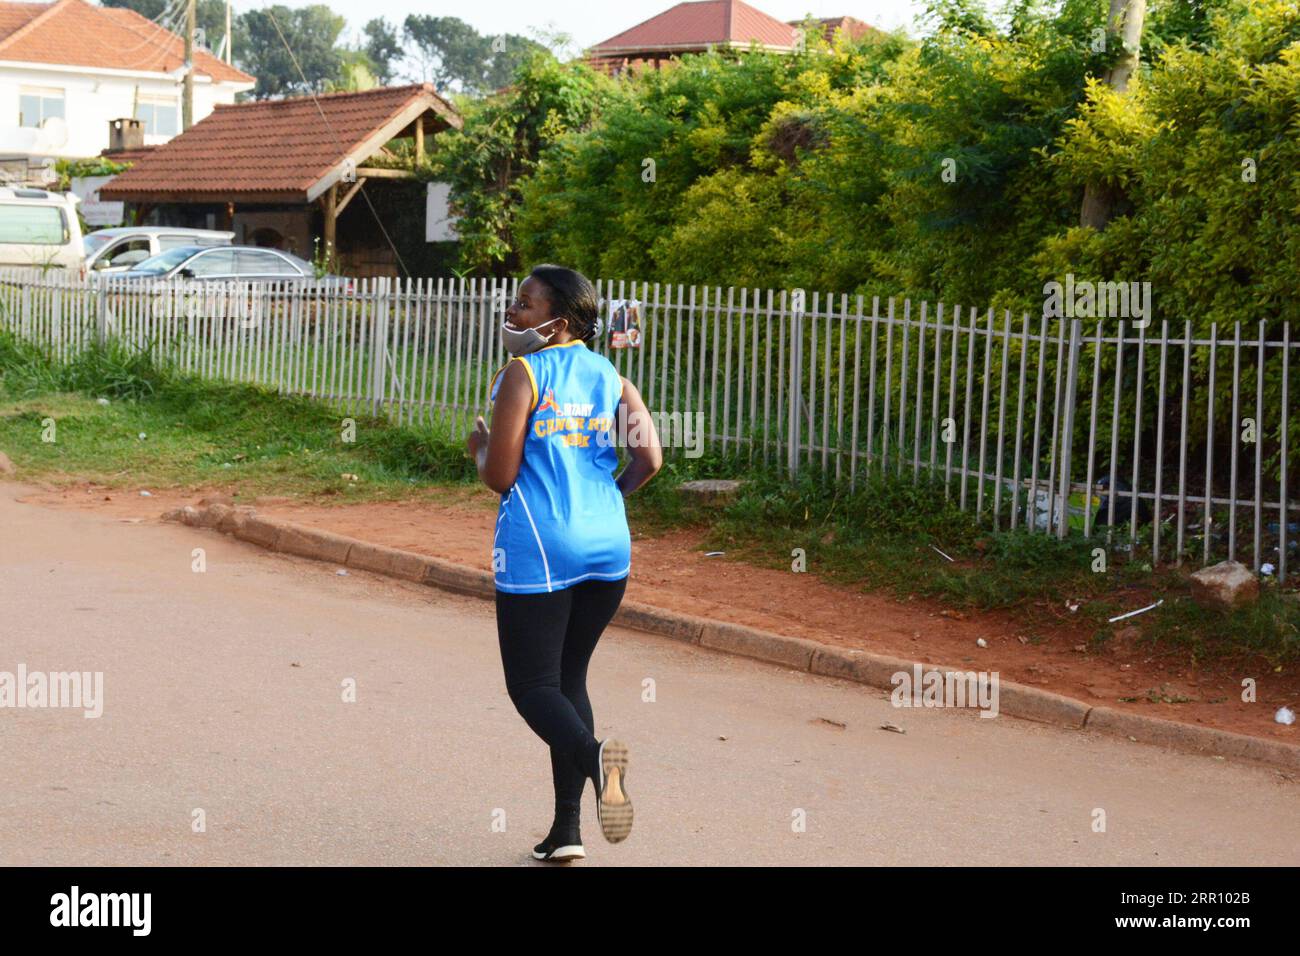 200830 -- KAMPALA, Aug. 30, 2020 -- A runner runs to finish line during the 2020 Virtual Rotary Cancer Marathon Run in Kampala, capital of Uganda, Aug. 30, 2020. The 2020 Rotary Cancer Marathon Run was held virtually due to COVID-19 pandemic.  UGANDA-KAMPALA-COVID-19-2020 VIRTUAL ROTARY CANCER RUN NicholasxKajoba PUBLICATIONxNOTxINxCHN Stock Photo